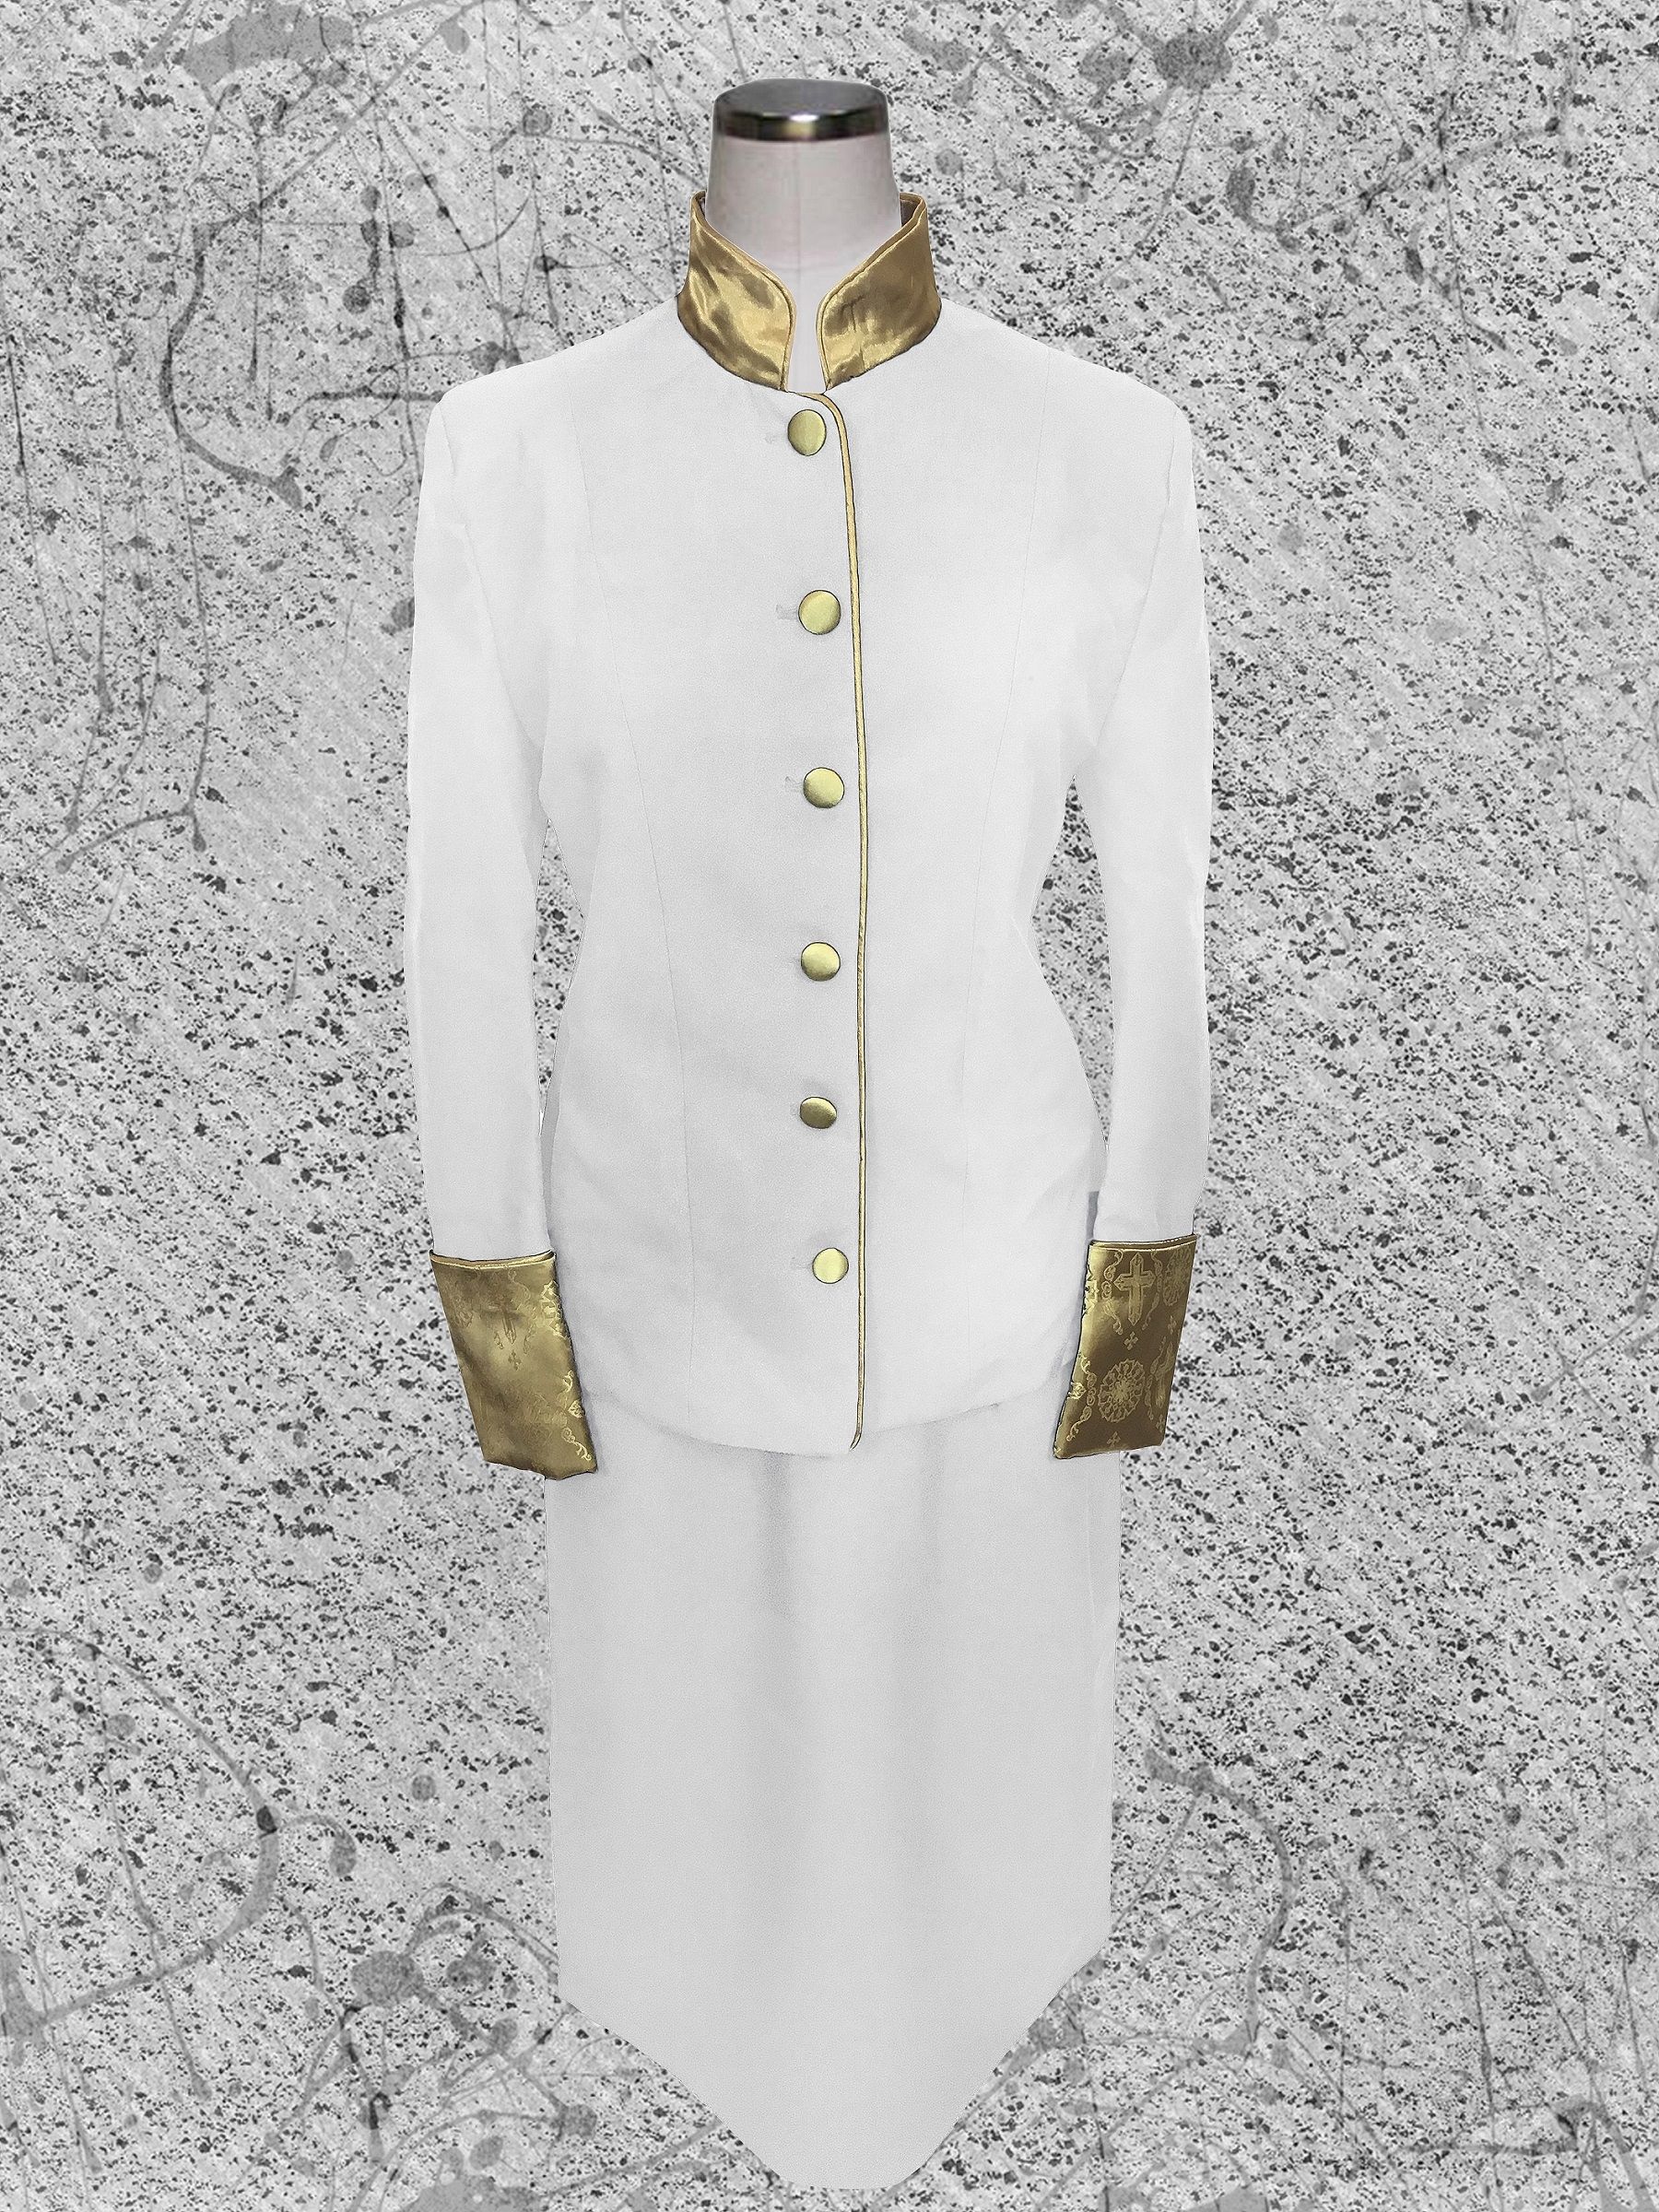 Women's White and Gold Clergy Suit